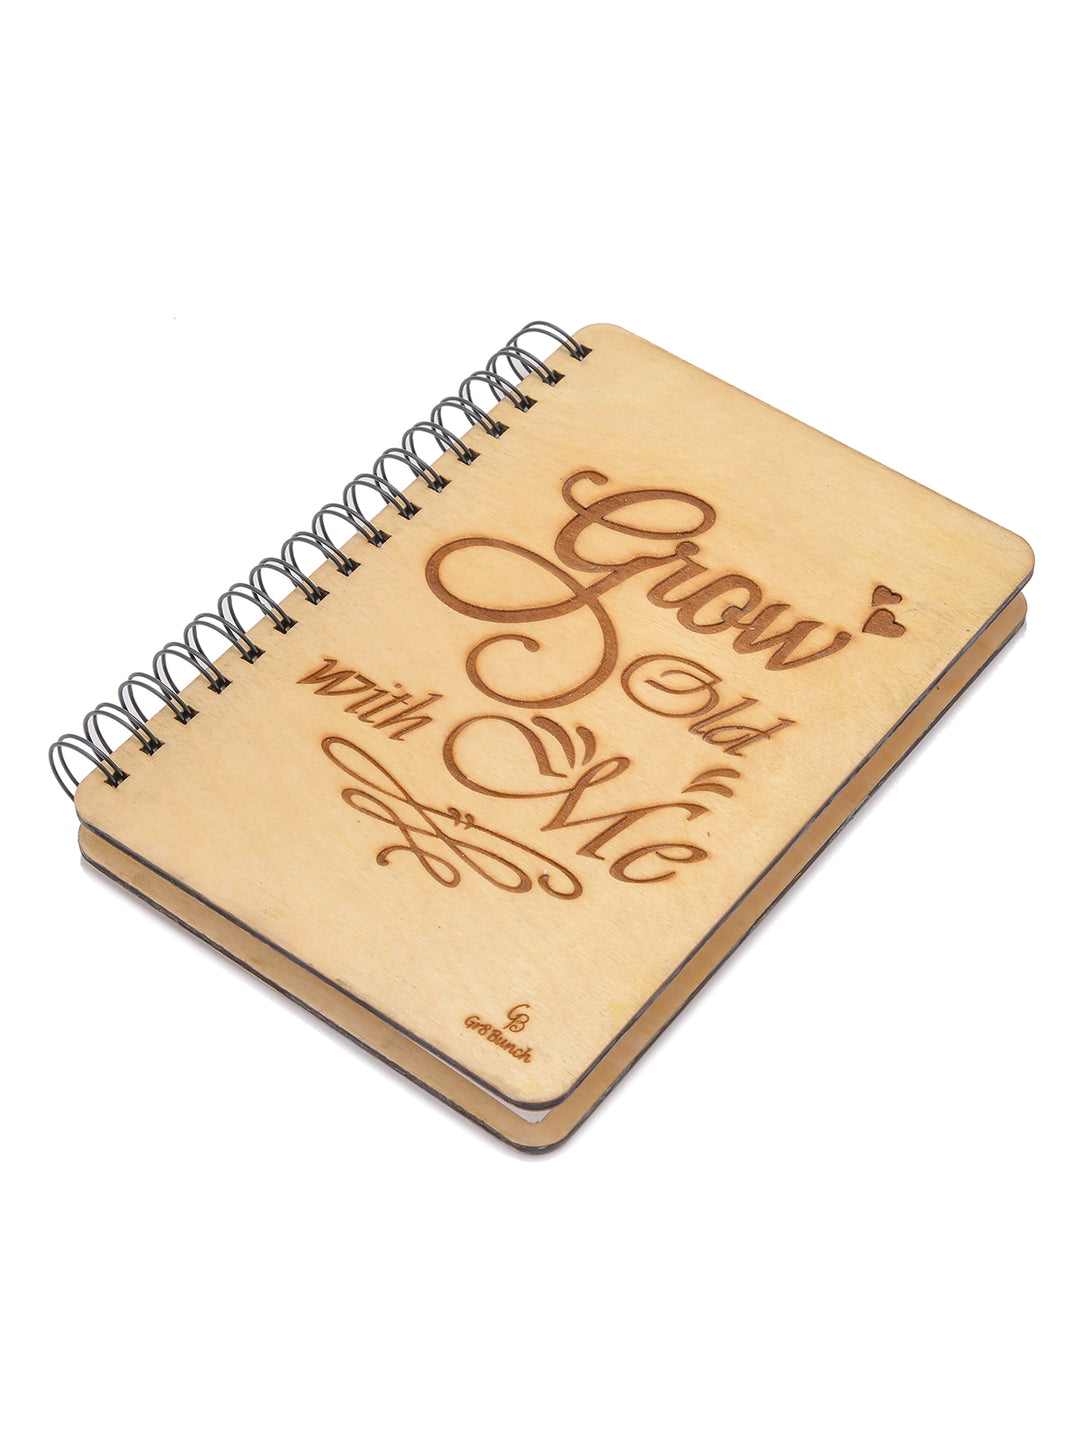 Grow Old with Me Customised Wooden Diary